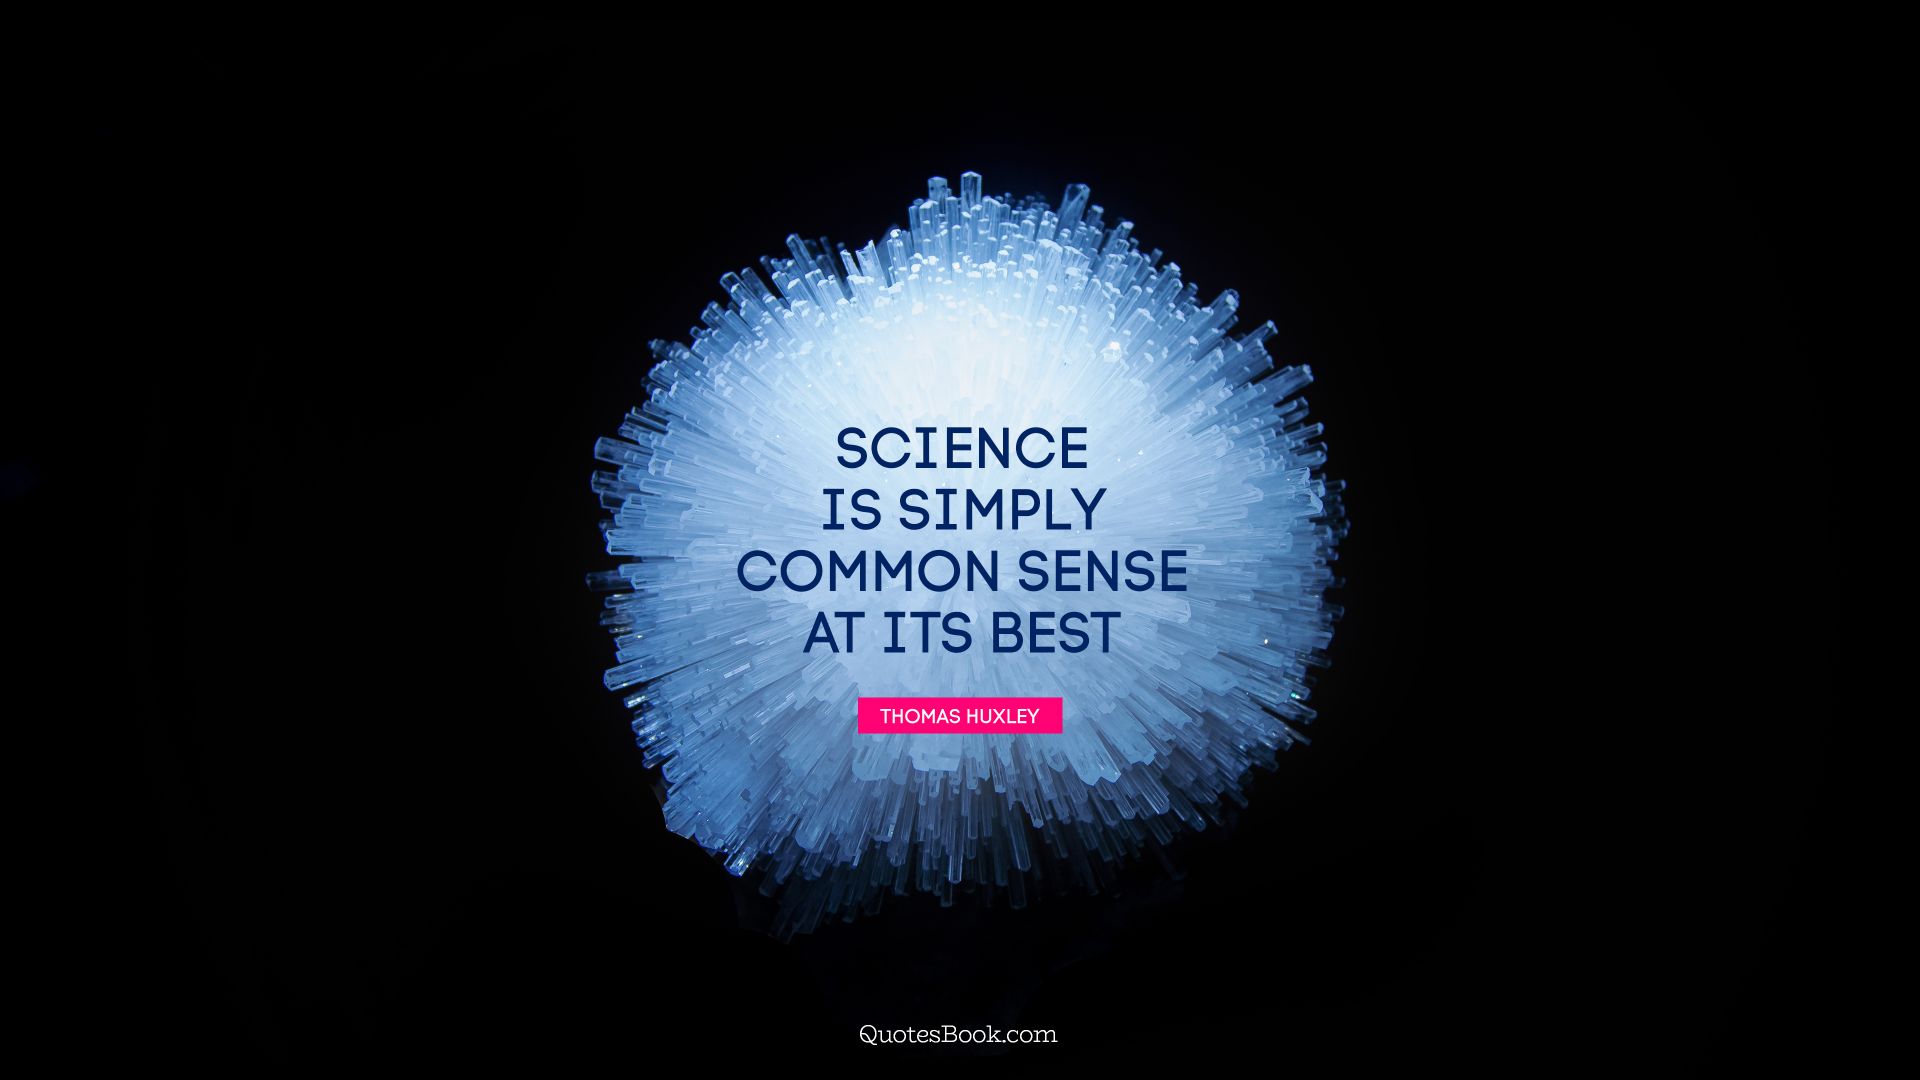 Science is simply common sense at its best. - Quote by Thomas Huxley